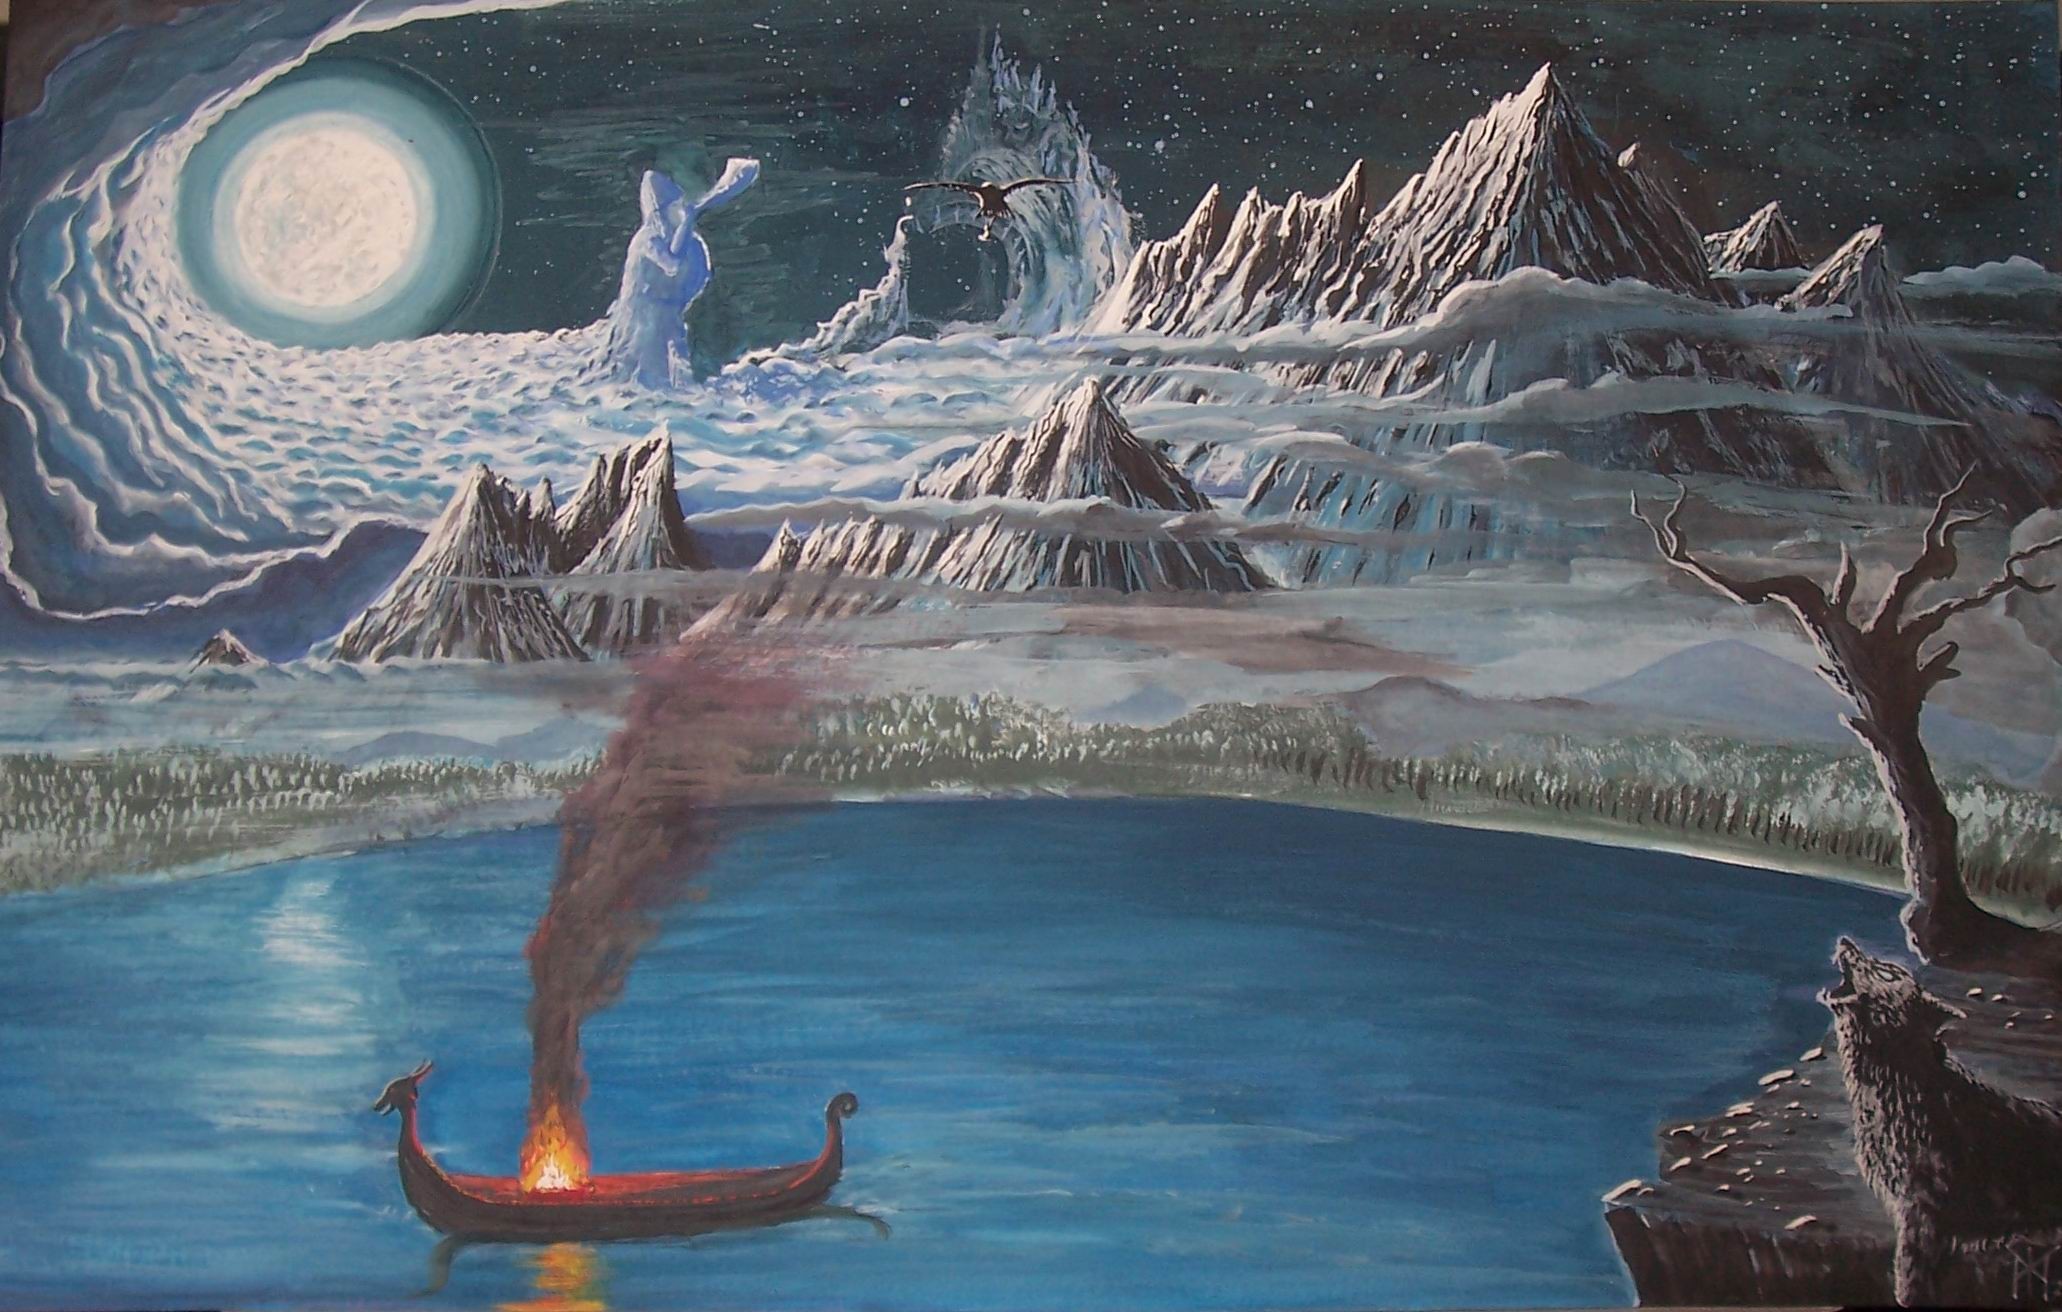 Painting Painting Norse Mythology Mountains Boat Fire 2062x1312